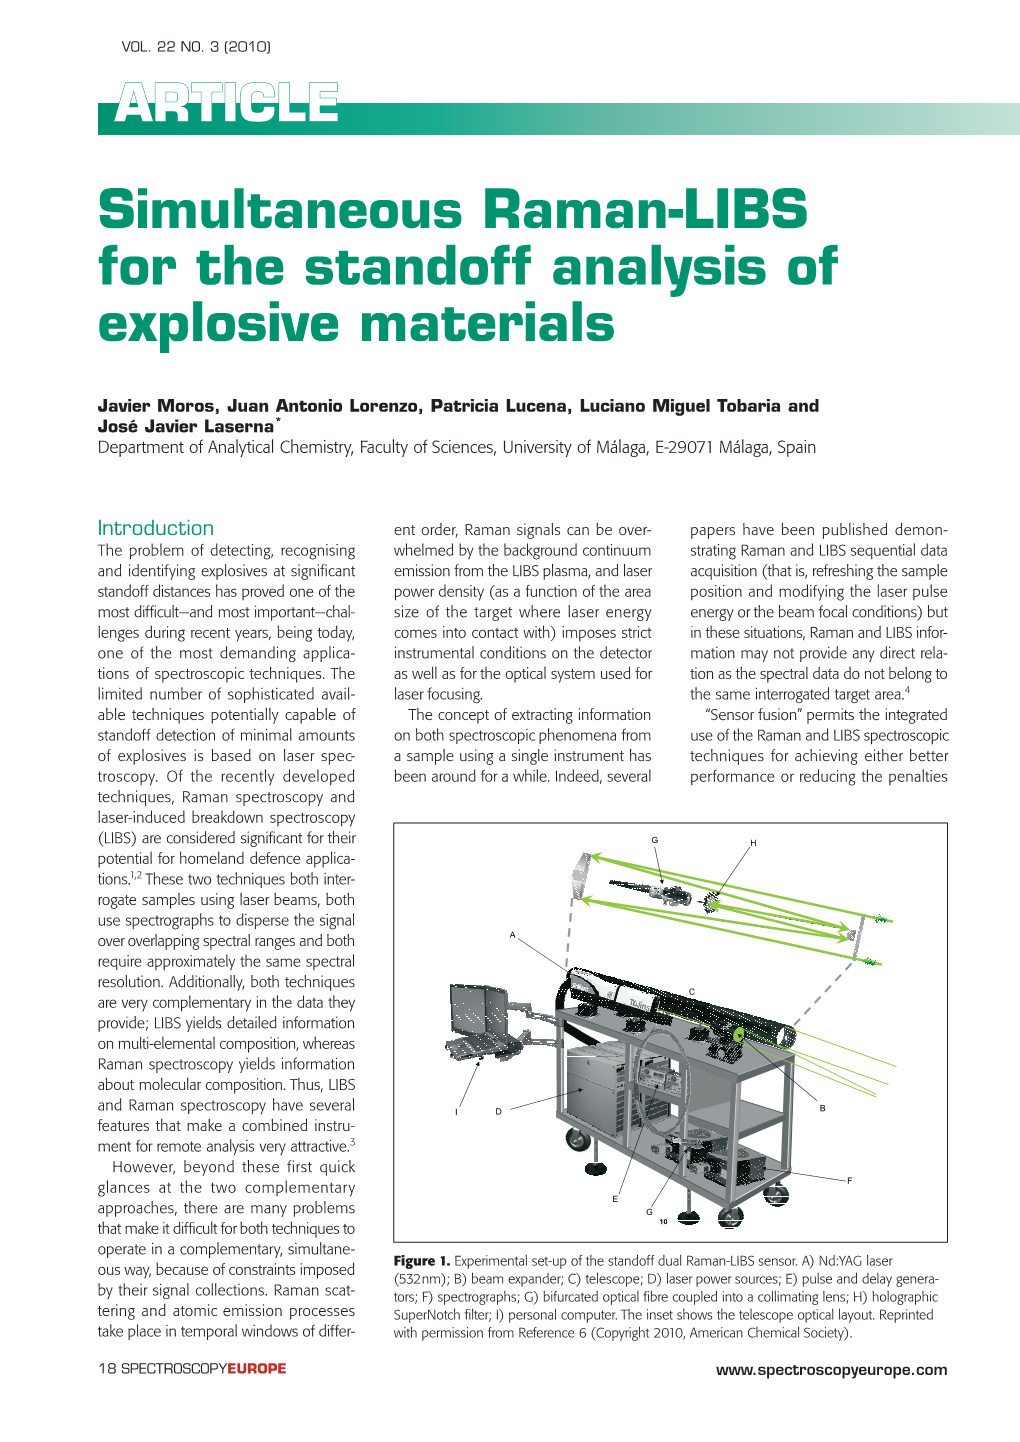 Simultaneous Raman-LIBS for the Standoff Analysis of Explosive Materials